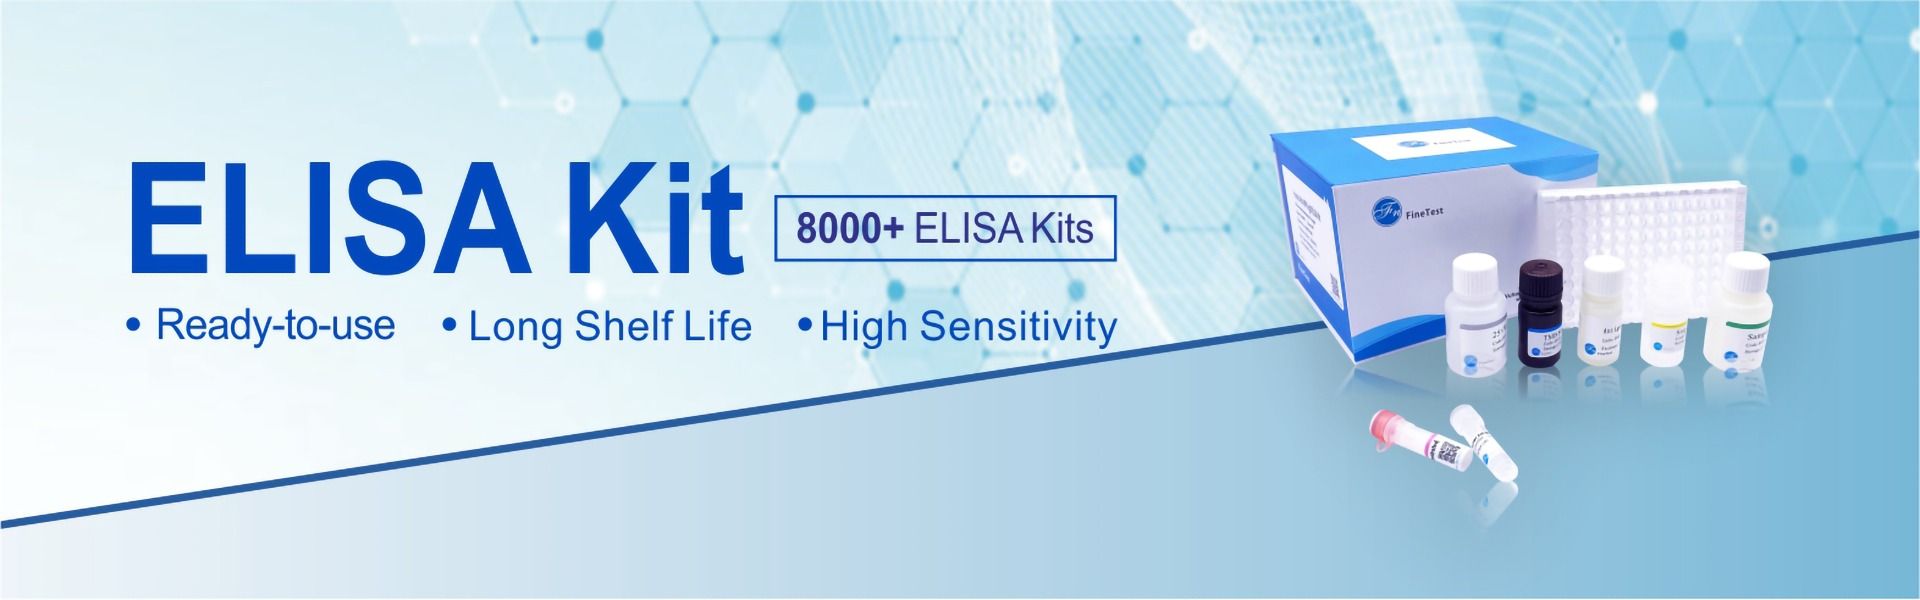 FineTest's ELISA assay kits are equipped with complete component allocation, characterized by strong specificity and high sensitivity. Production and detection processes are strictly controlled to minimize coefficient of variation (CV) deviation, ensuring reliable reproducibility. We offer over 3000 popular target products, covering a variety of species including humans, mice, rats, monkeys, pigs, dogs, cattle, and more, totaling over 10 species.